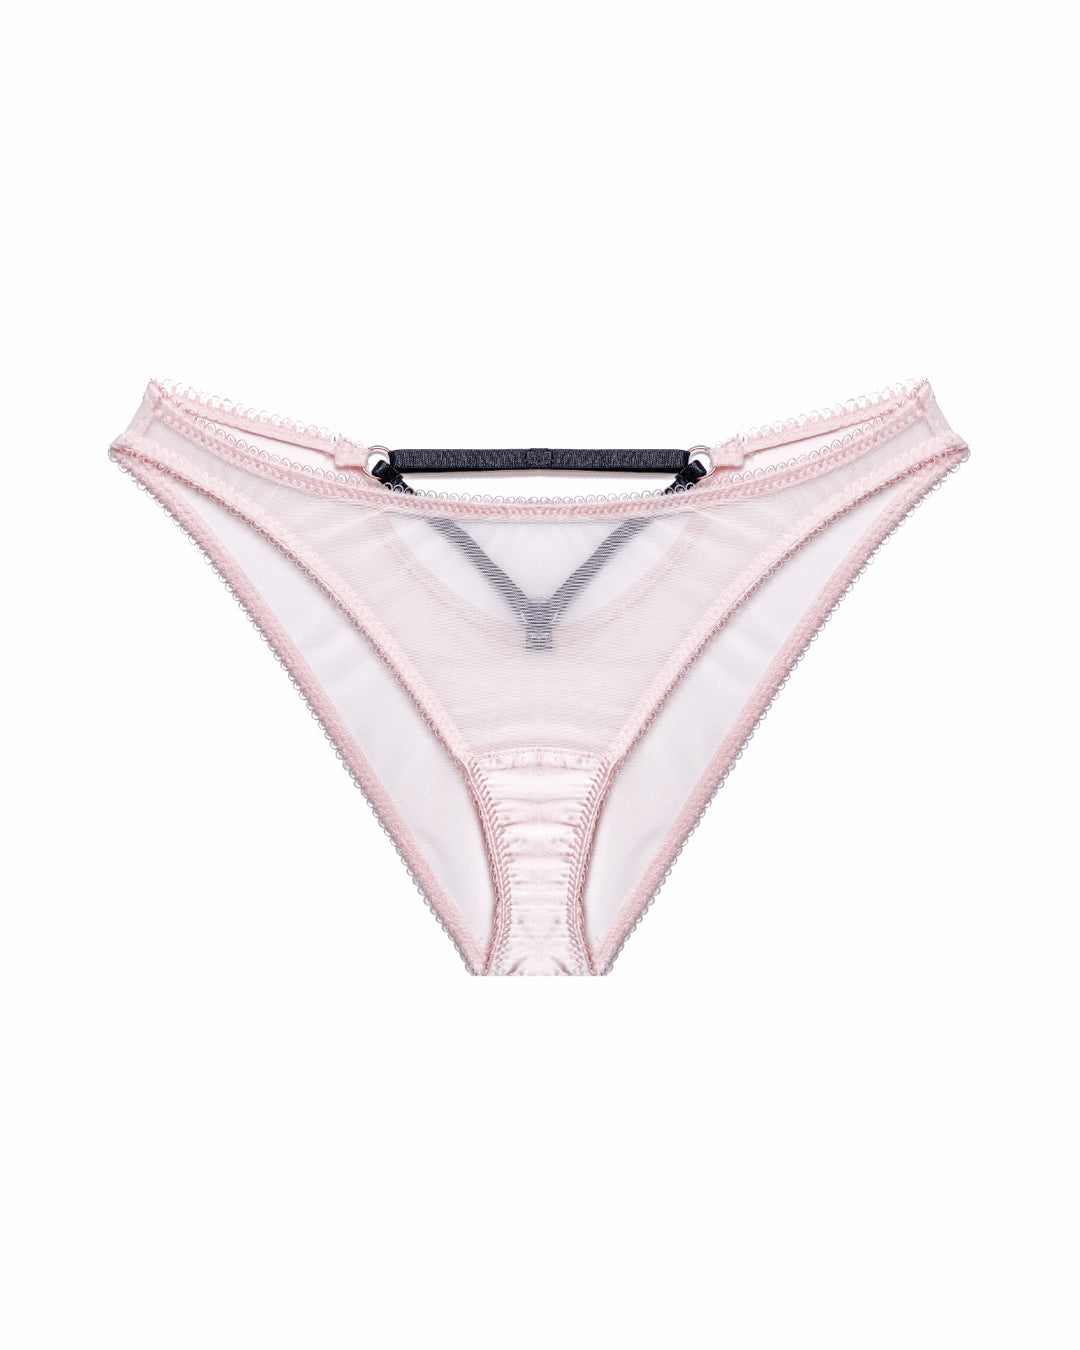 Vivi Leigh London lingerie XS Blush Pink Mesh Cut-out Briefs sexy harness luxury lingerie uk sustainable brand